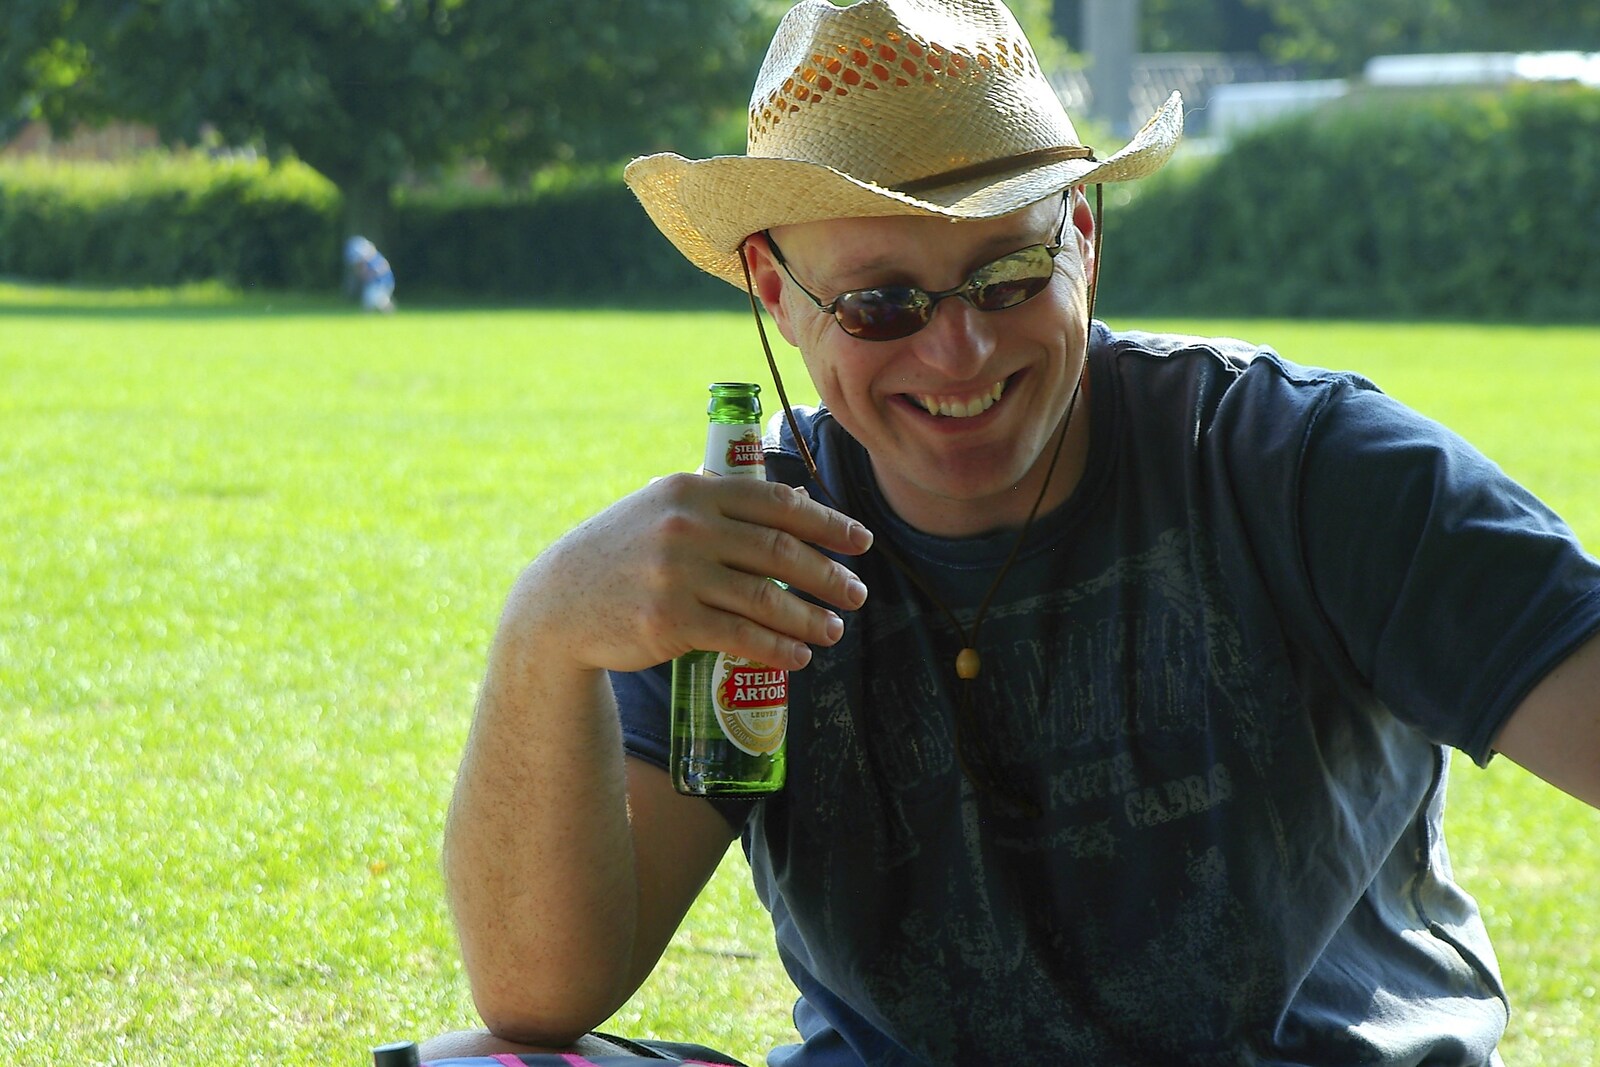 A be-hatted Gov, and a bottle of Stella from A Picnic by the Castle on a Hill, Framlingham, Suffolk - 17th June 2006